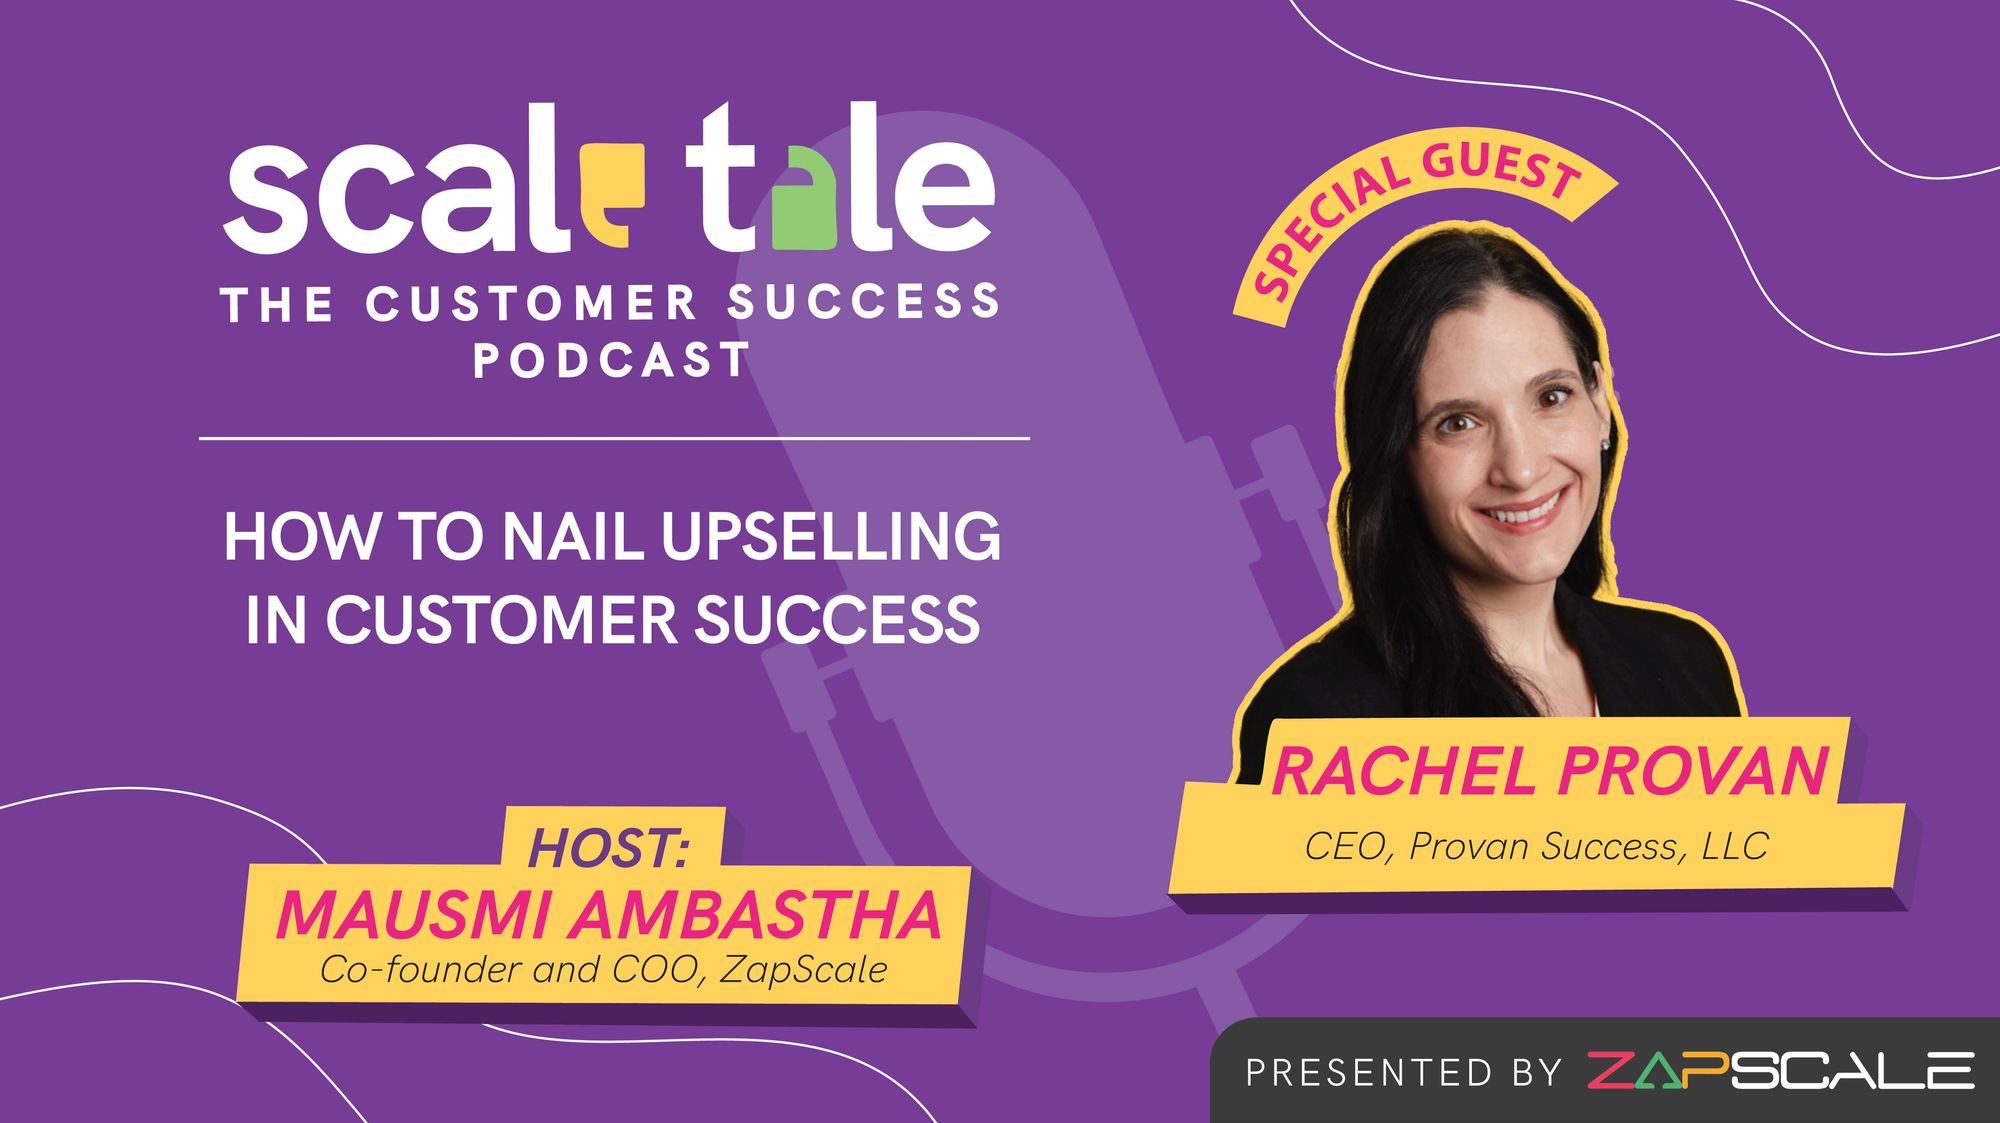 How To Nail Upselling in Customer Success w/ Rachel Provan